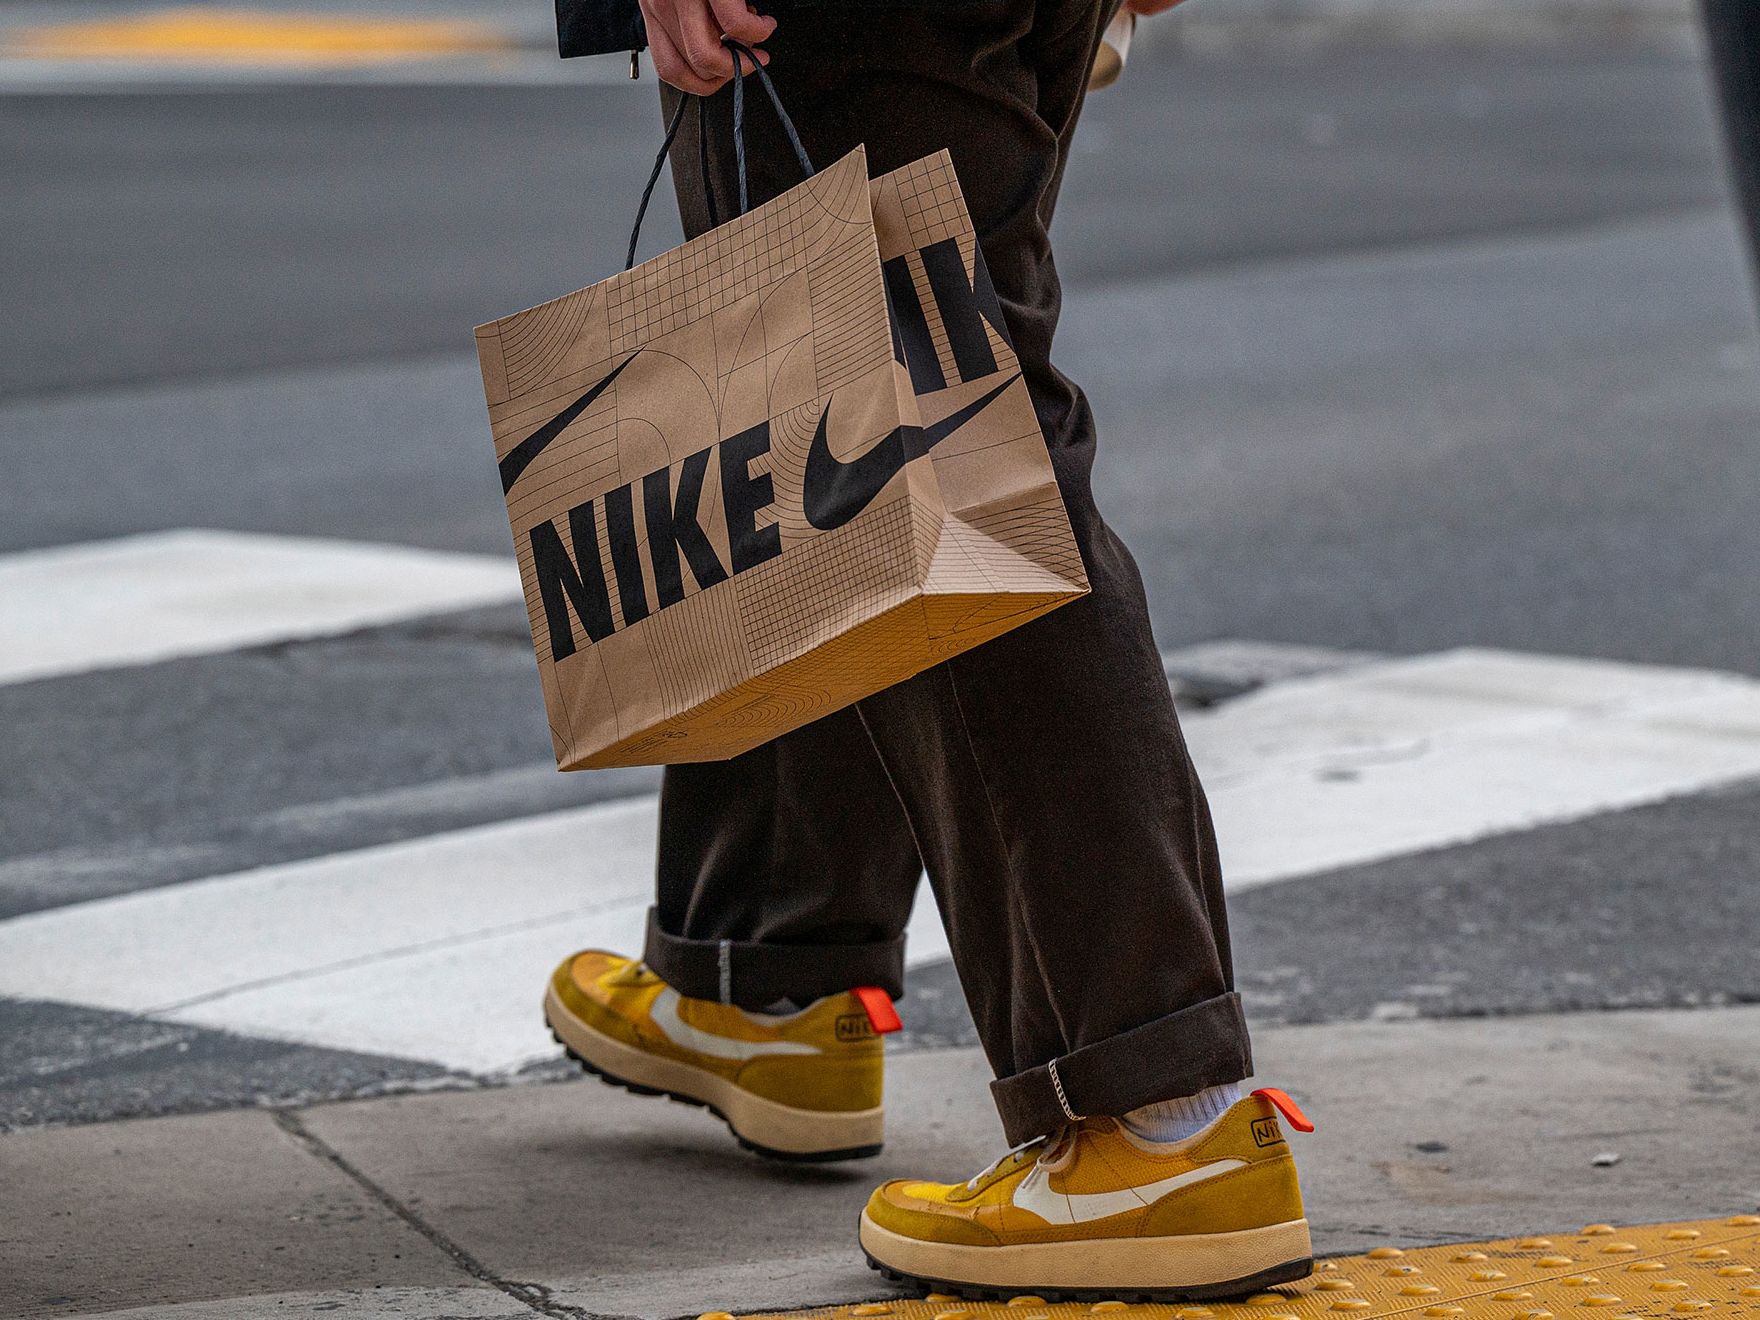 Boos langzaam etiquette Shoppers are still buying Nike sneakers | CNN Business